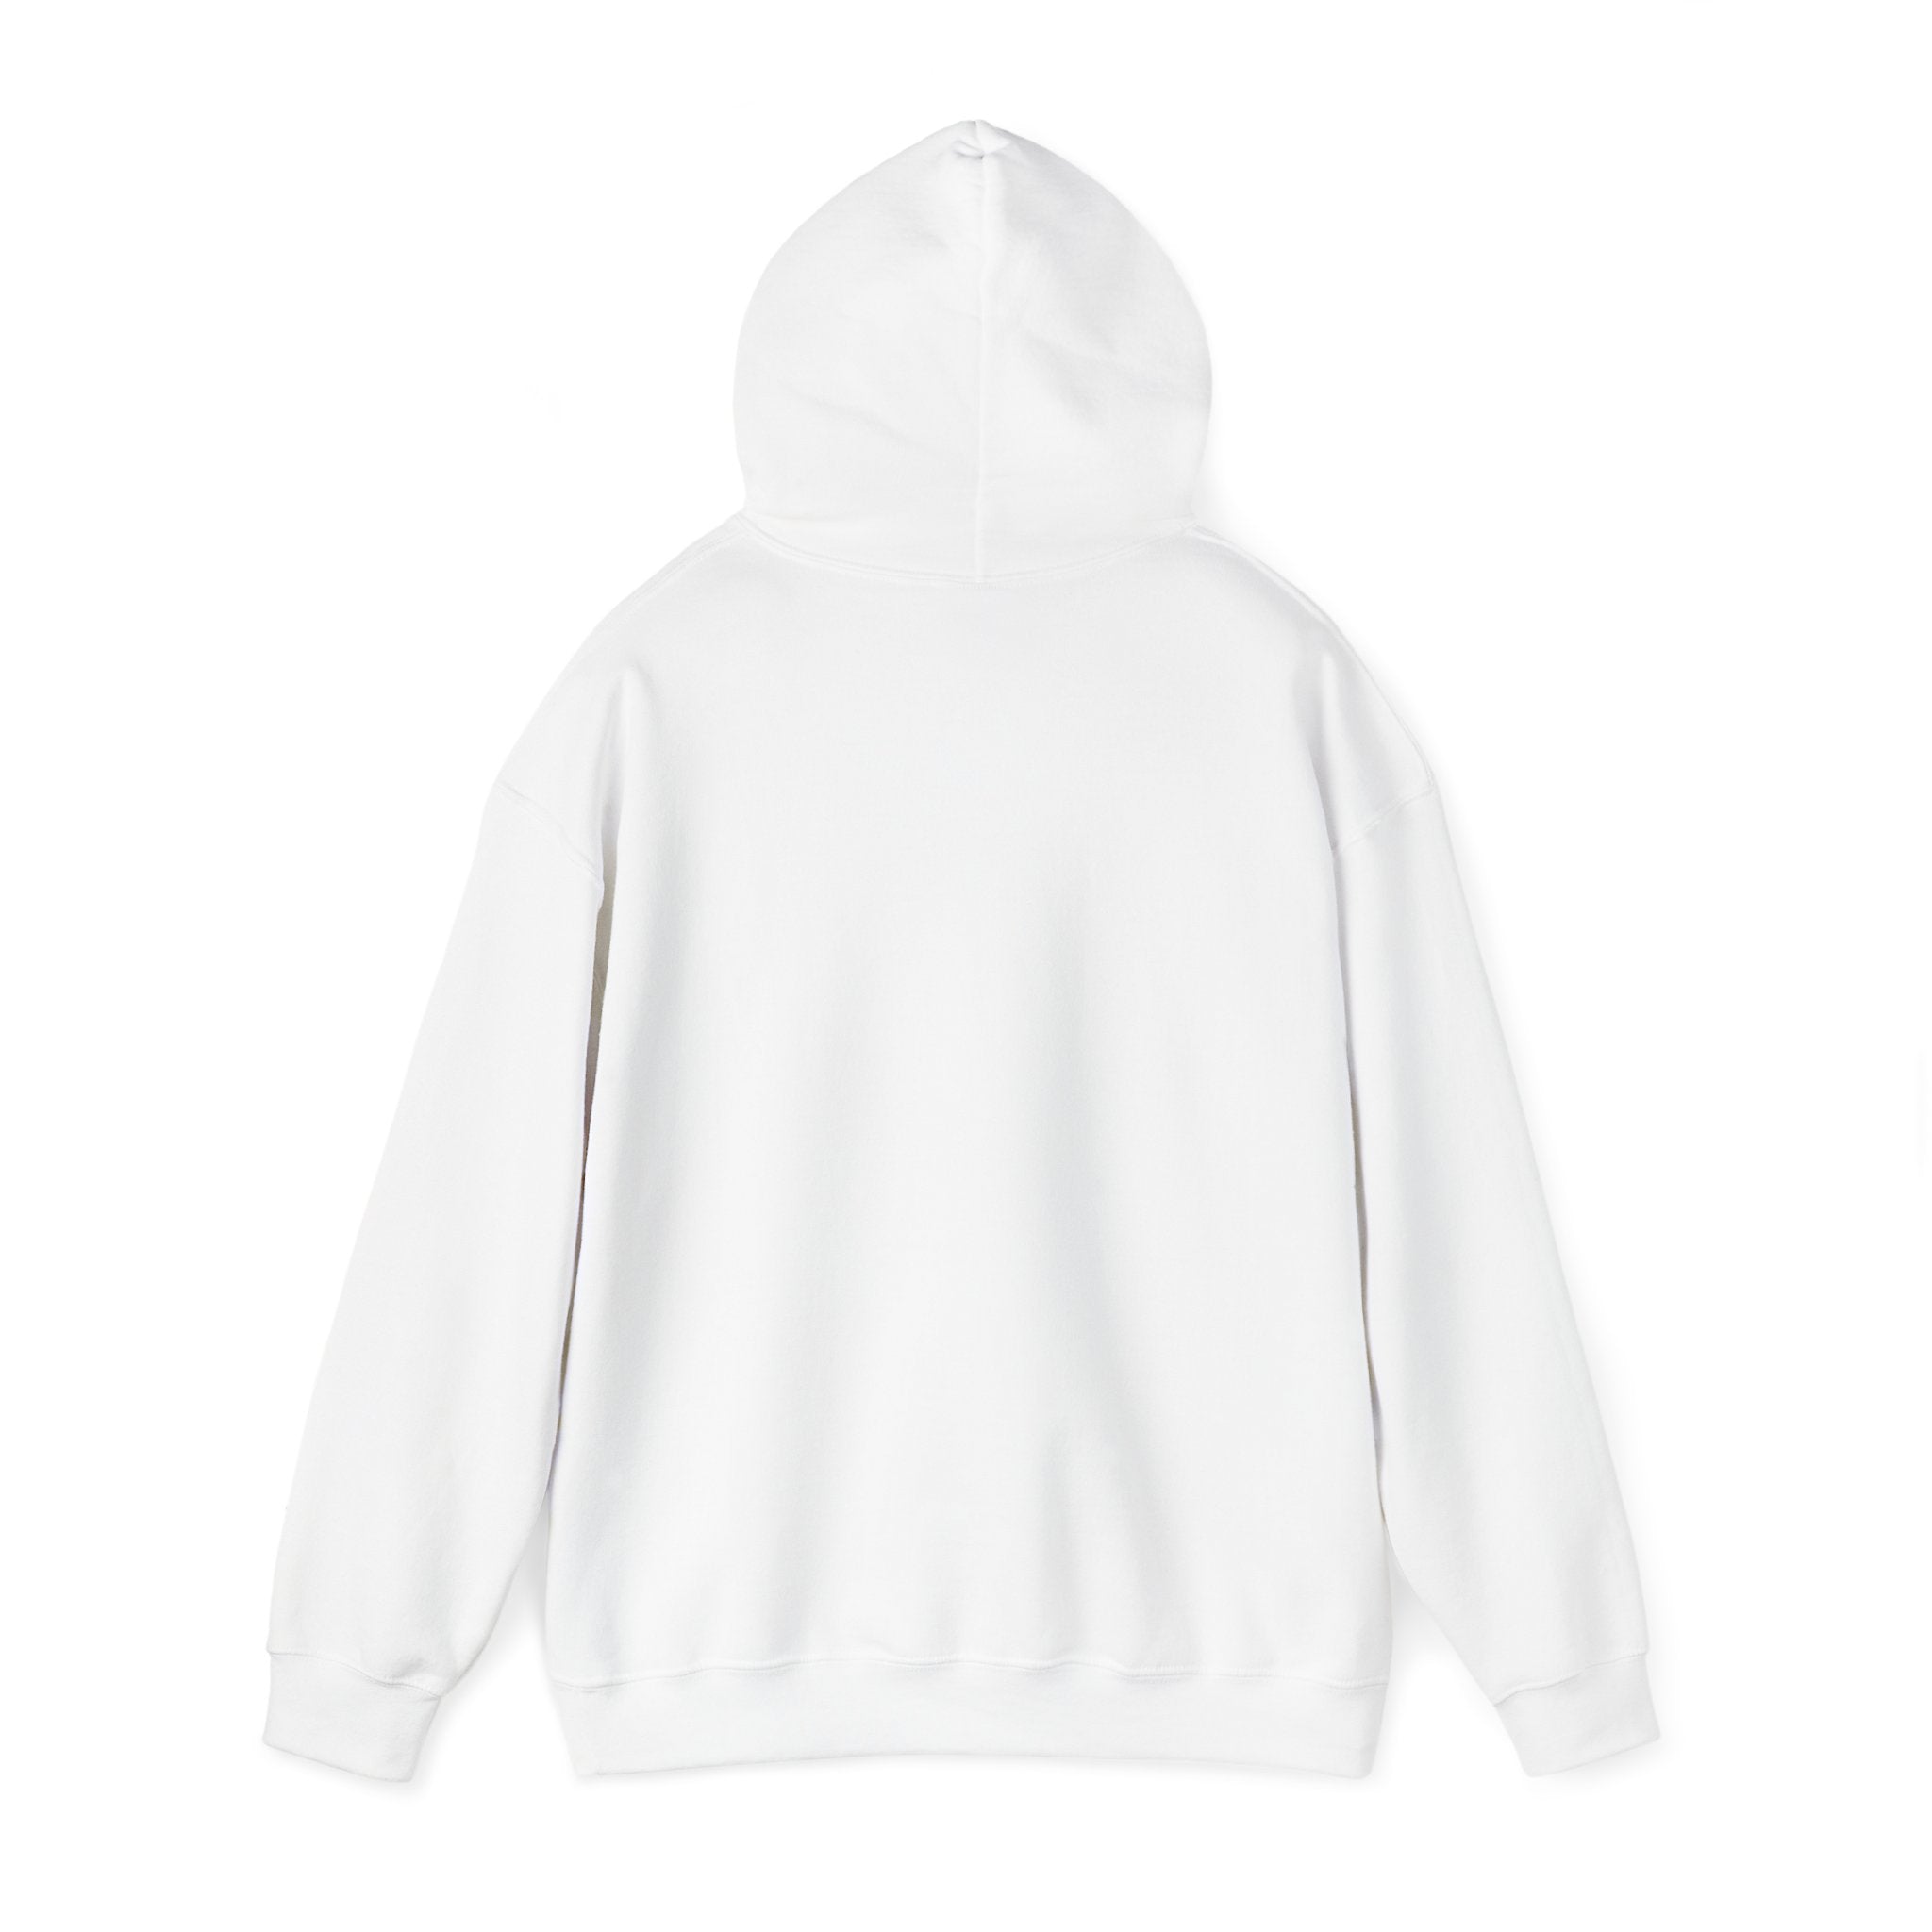 Back view of a plain white Star Wars Easter Stormtrooper - Hooded Sweatshirt, reminiscent of an Easter Stormtrooper's casual wear.